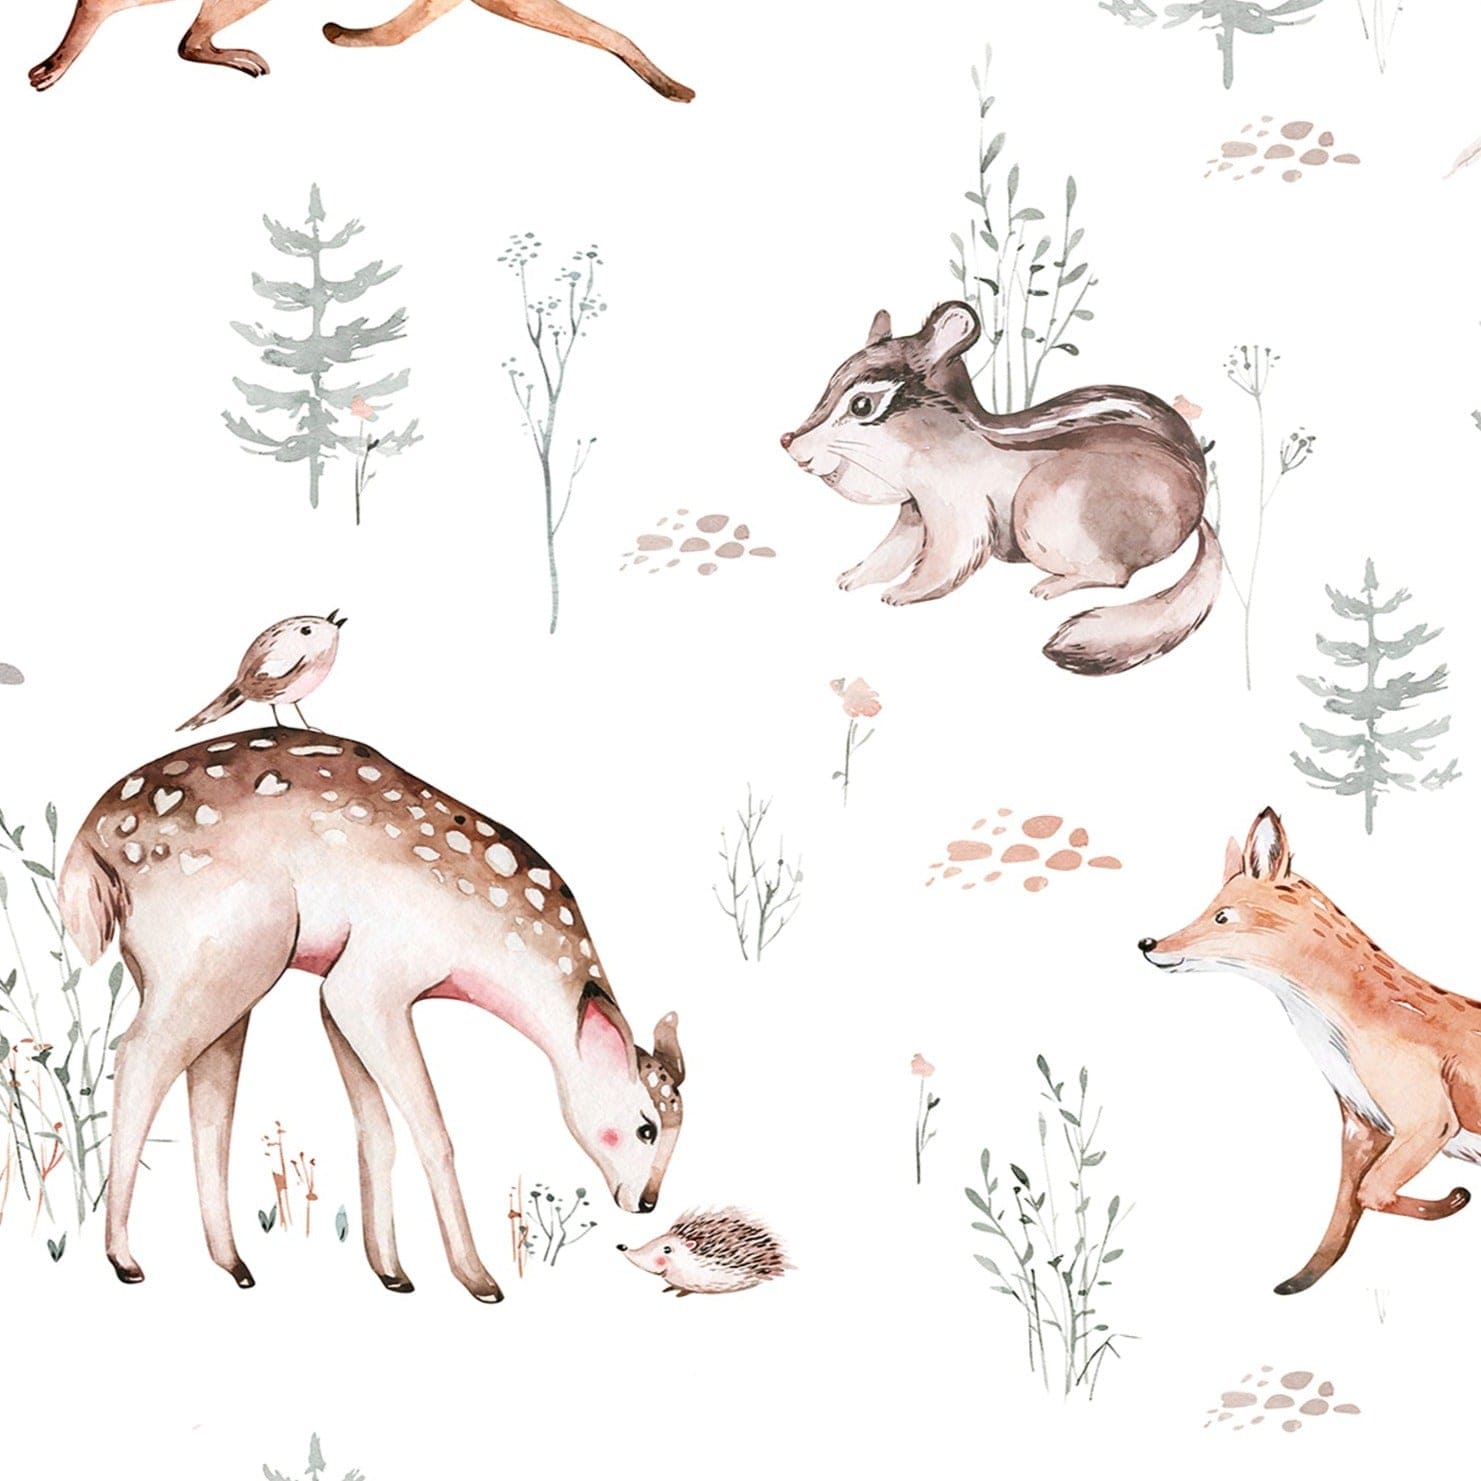 A close-up view of the Woodland Wonder Wallpaper, illustrating a whimsical pattern of forest animals and plants. Detailed images of foxes, deer, and rabbits blend seamlessly with light vegetation, set against a soft, neutral background.